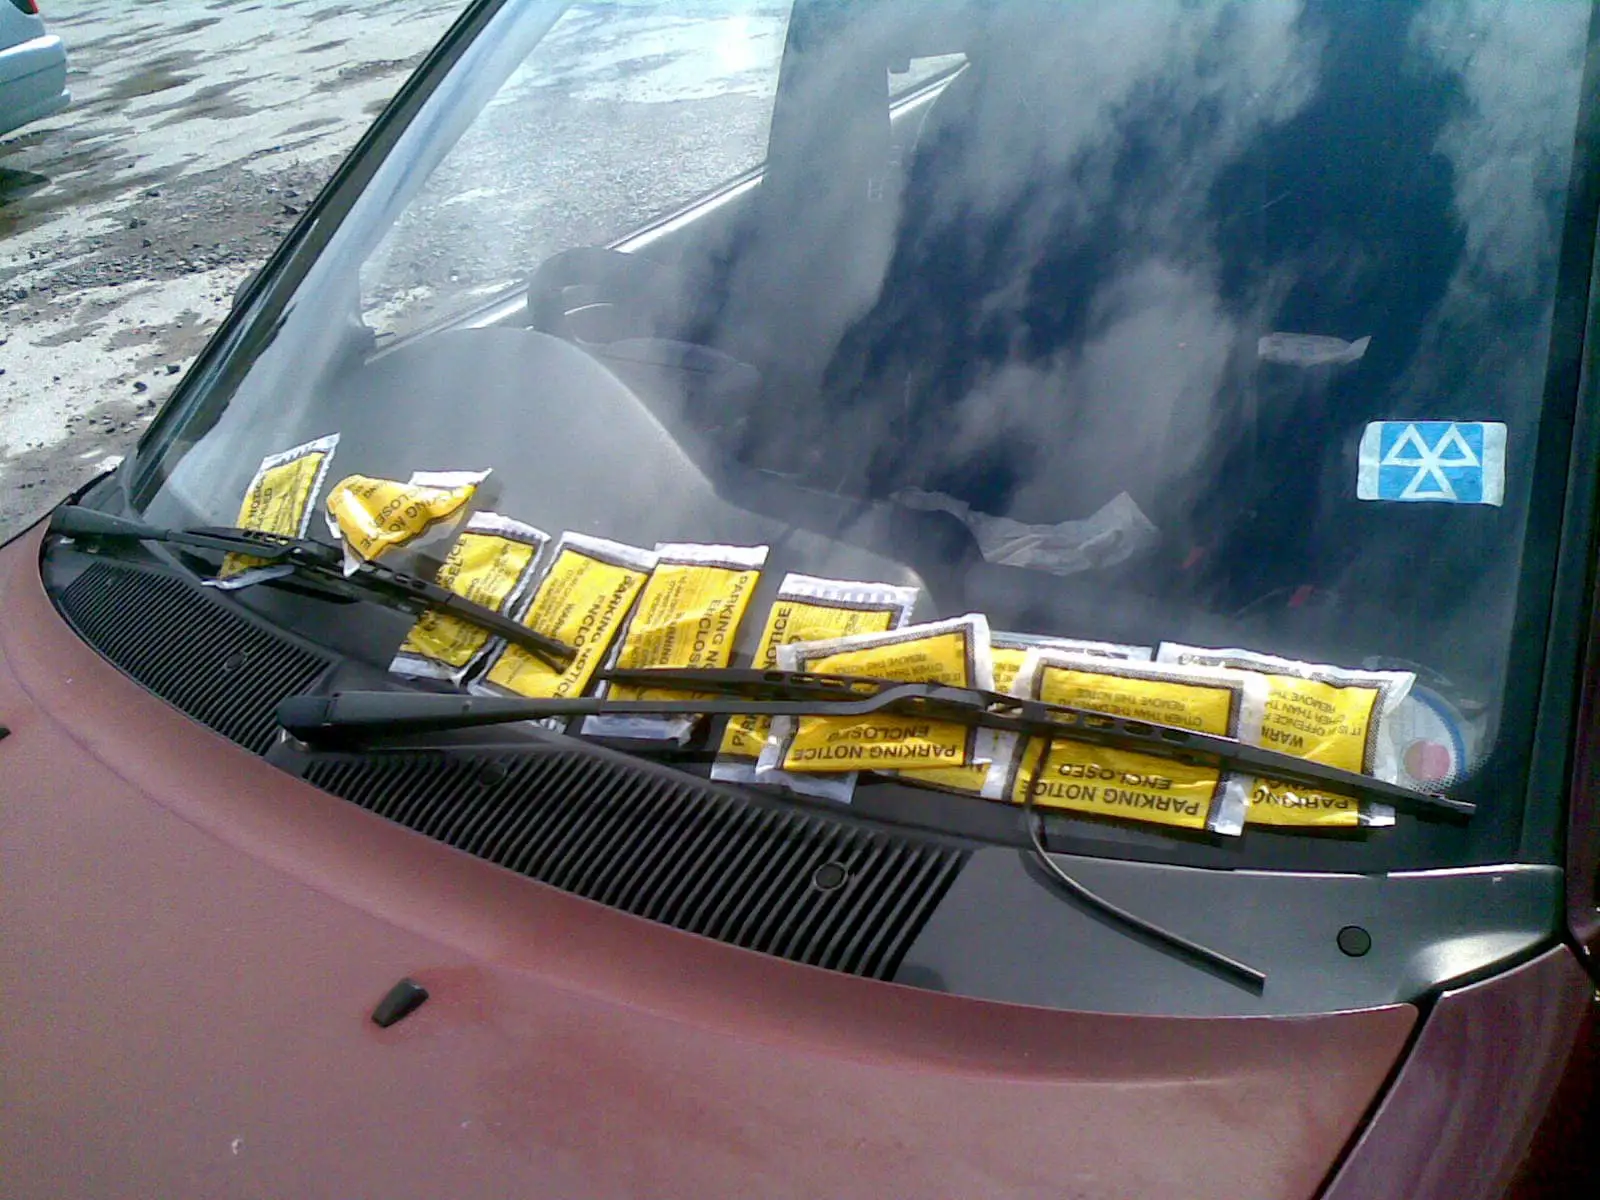 Car with loads of parking tickets on the windscreen